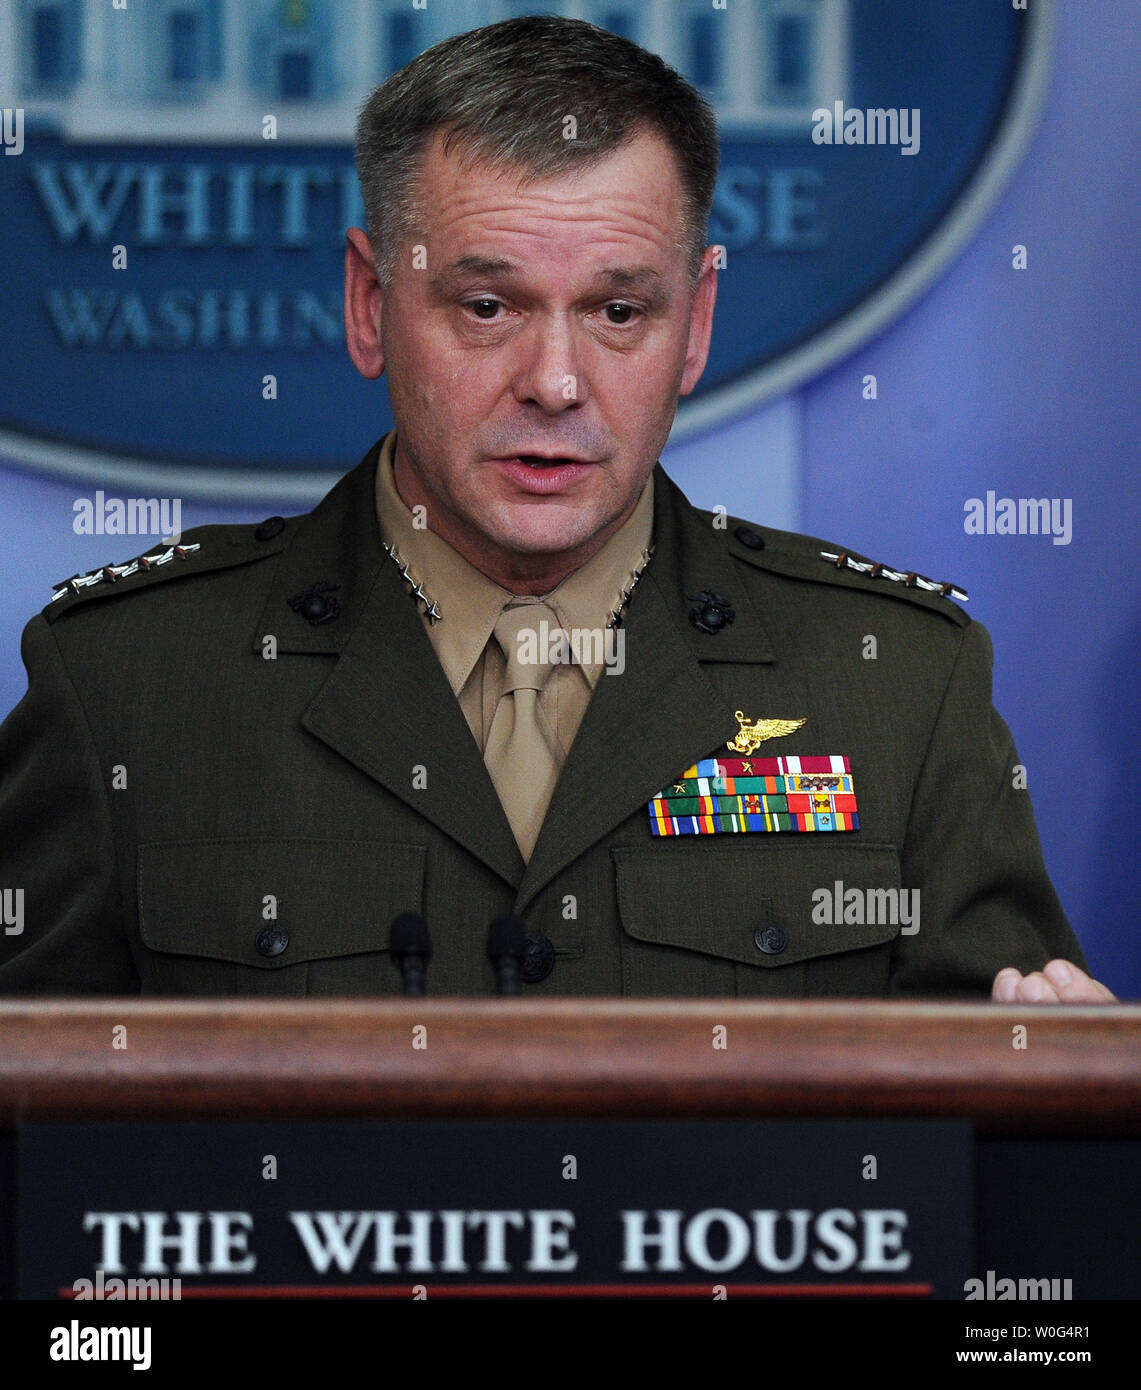 Joint Chiefs of Staff Vice Chairman Gen. James Cartwright discusses the Afghanistan-Pakistan Annual Review in the Brady Press Briefing Room of the White House Washington on December 16, 2010.     UPI/Roger L. Wollenberg Stock Photo